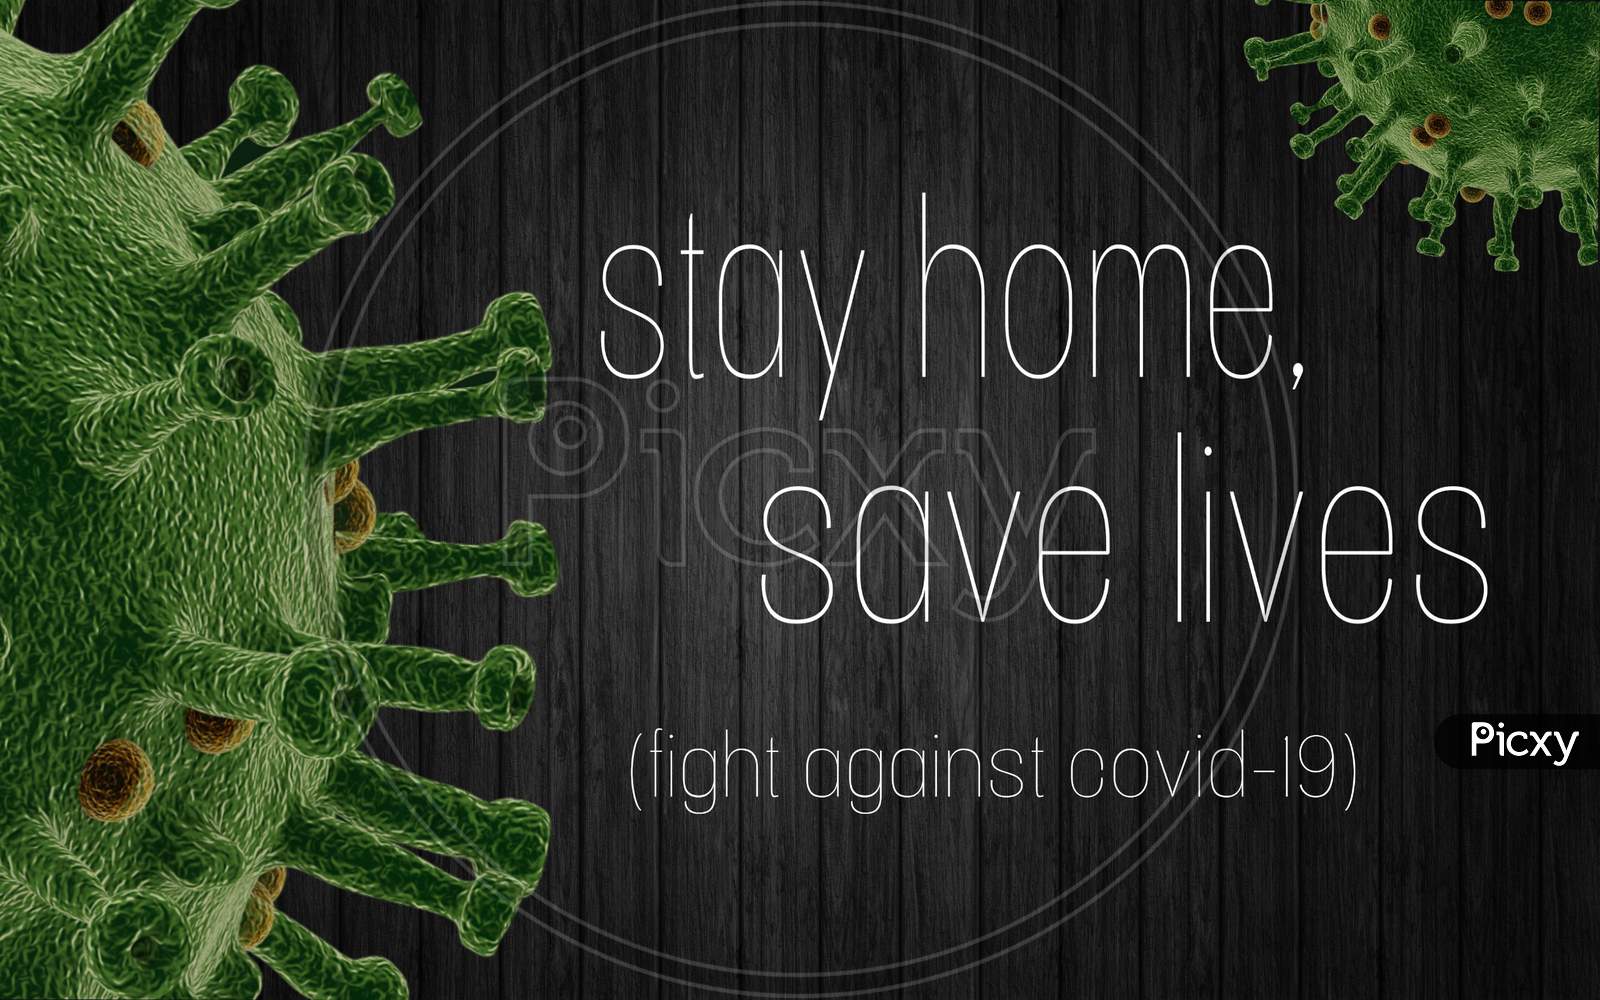 Covid-19,World Health Organization WHO introduced new official name for Coronavirus disease named COVID-19,Stay Home quarantine coronavirus epidemic illustration for social media, stay home save lives